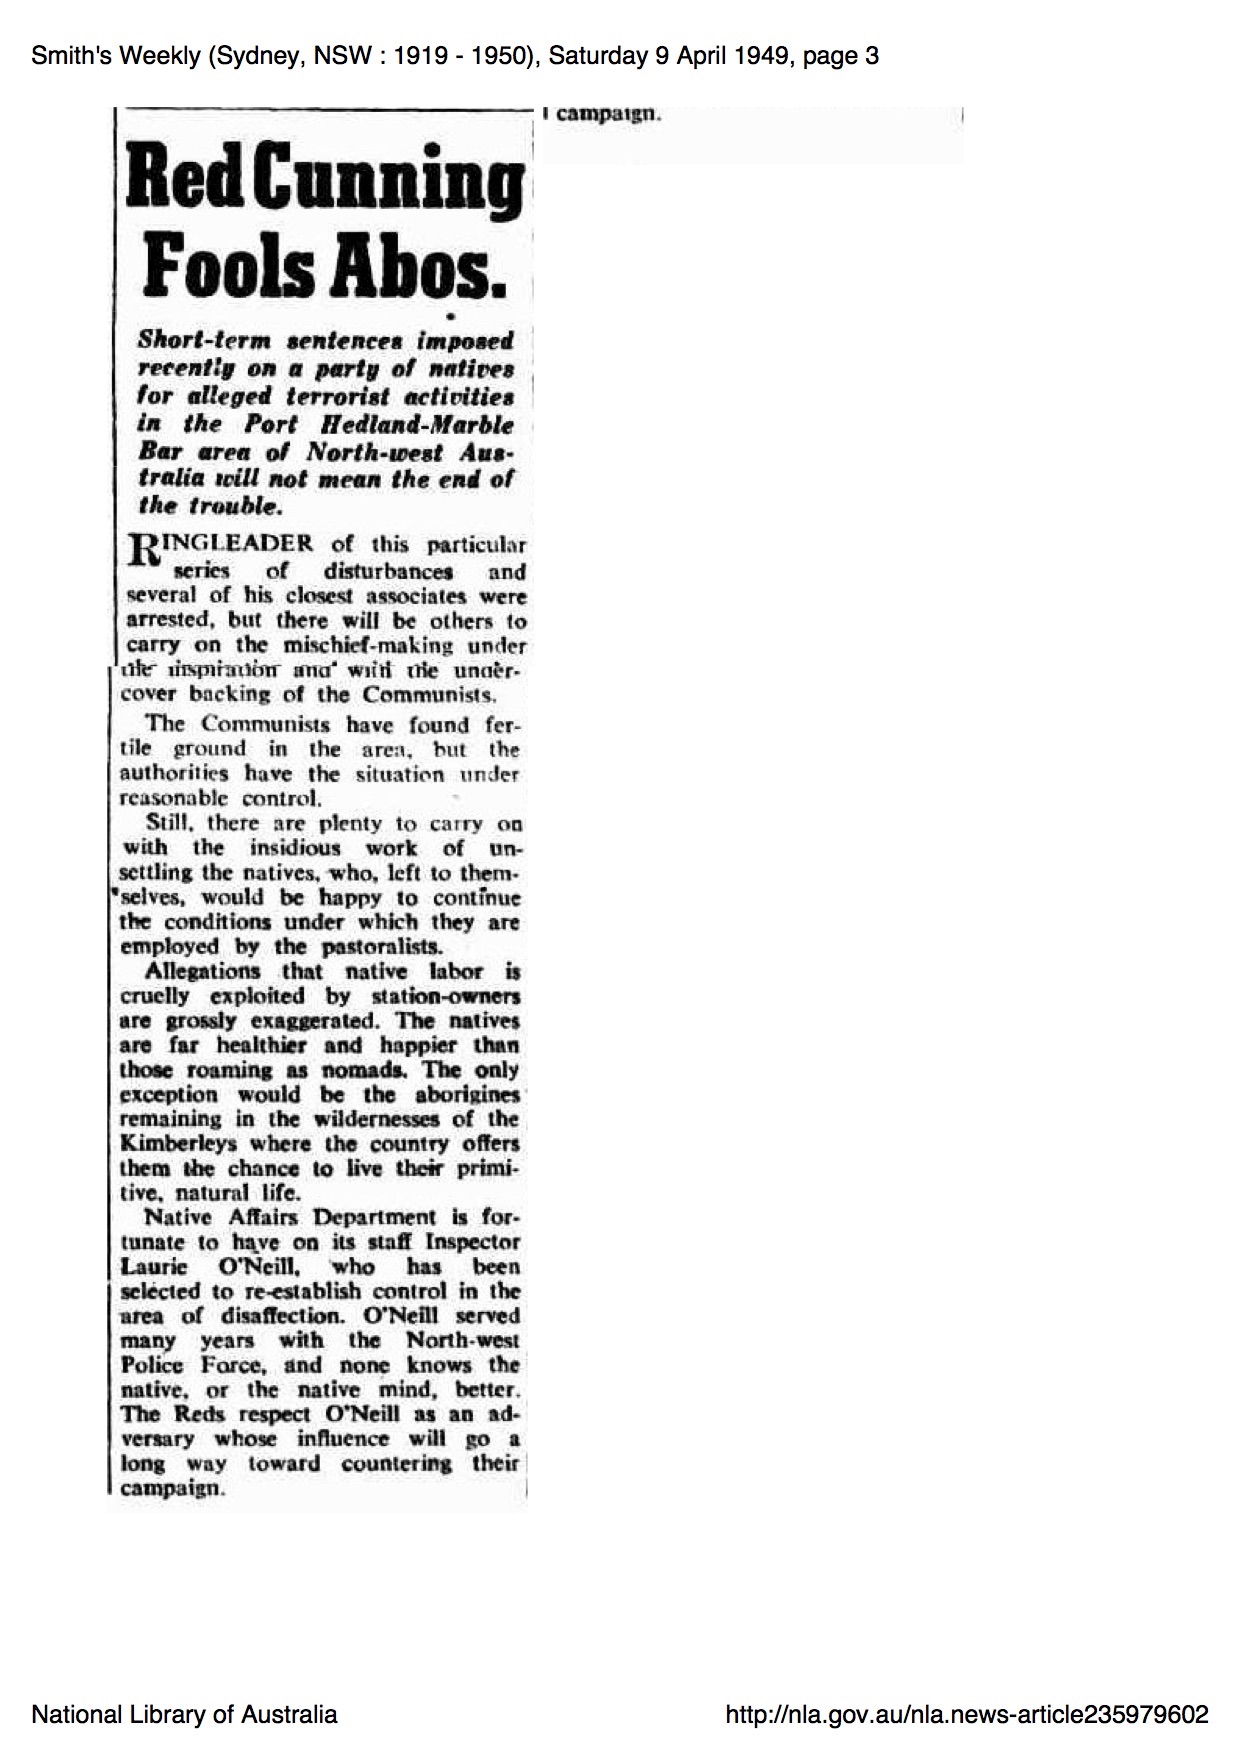 Red Cunning Fools Abos newspaper article